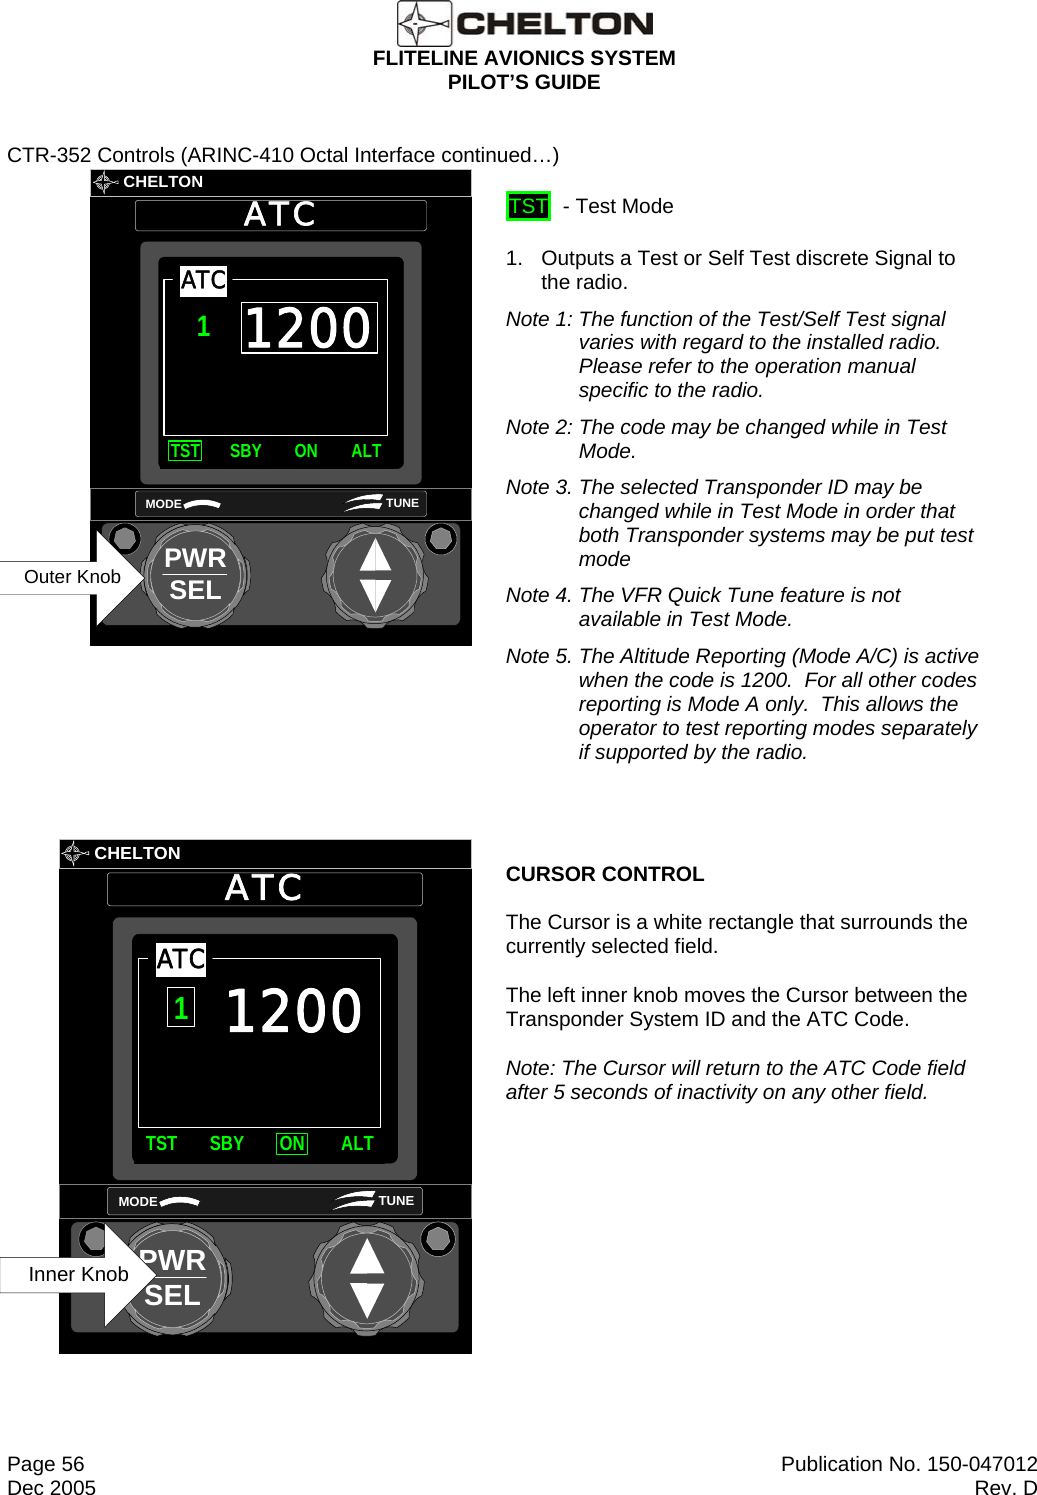  FLITELINE AVIONICS SYSTEM PILOT’S GUIDE  Page 56  Publication No. 150-047012 Dec 2005  Rev. D CTR-352 Controls (ARINC-410 Octal Interface continued…)       CHELTONATCPWRSELMODE TUNE1200TST SBY ON ALTATC1Outer Knob  TST  - Test Mode 1.   Outputs a Test or Self Test discrete Signal to the radio.  Note 1: The function of the Test/Self Test signal varies with regard to the installed radio.  Please refer to the operation manual specific to the radio. Note 2: The code may be changed while in Test Mode. Note 3. The selected Transponder ID may be changed while in Test Mode in order that both Transponder systems may be put test mode Note 4. The VFR Quick Tune feature is not available in Test Mode. Note 5. The Altitude Reporting (Mode A/C) is active when the code is 1200.  For all other codes reporting is Mode A only.  This allows the operator to test reporting modes separately if supported by the radio.         CHELTONATCPWRSELMODE TUNE1200TST SBY ON ALTATC1Inner Knob CURSOR CONTROL The Cursor is a white rectangle that surrounds the currently selected field. The left inner knob moves the Cursor between the Transponder System ID and the ATC Code. Note: The Cursor will return to the ATC Code field after 5 seconds of inactivity on any other field. 